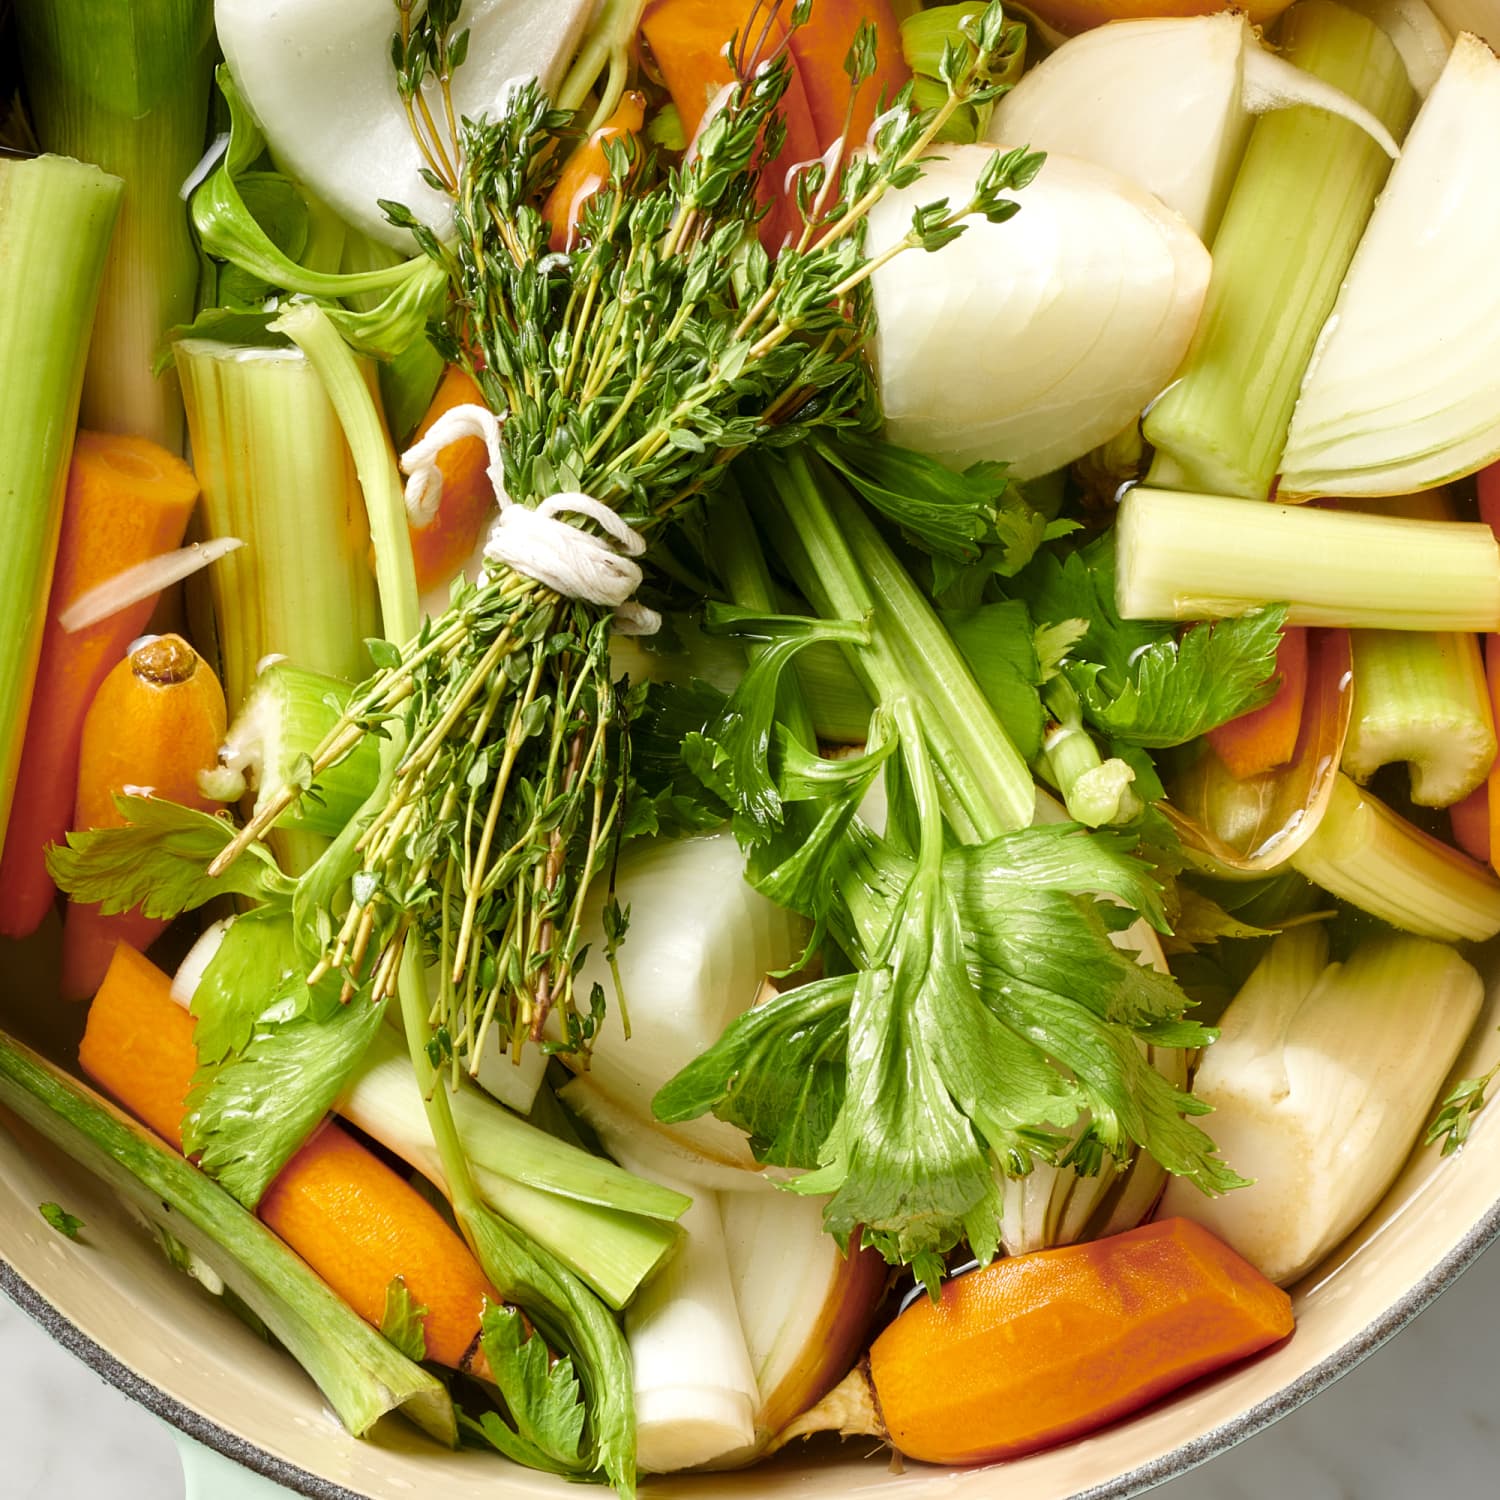 How to Make Vegetable Stock (Easy Stovetop Recipe)